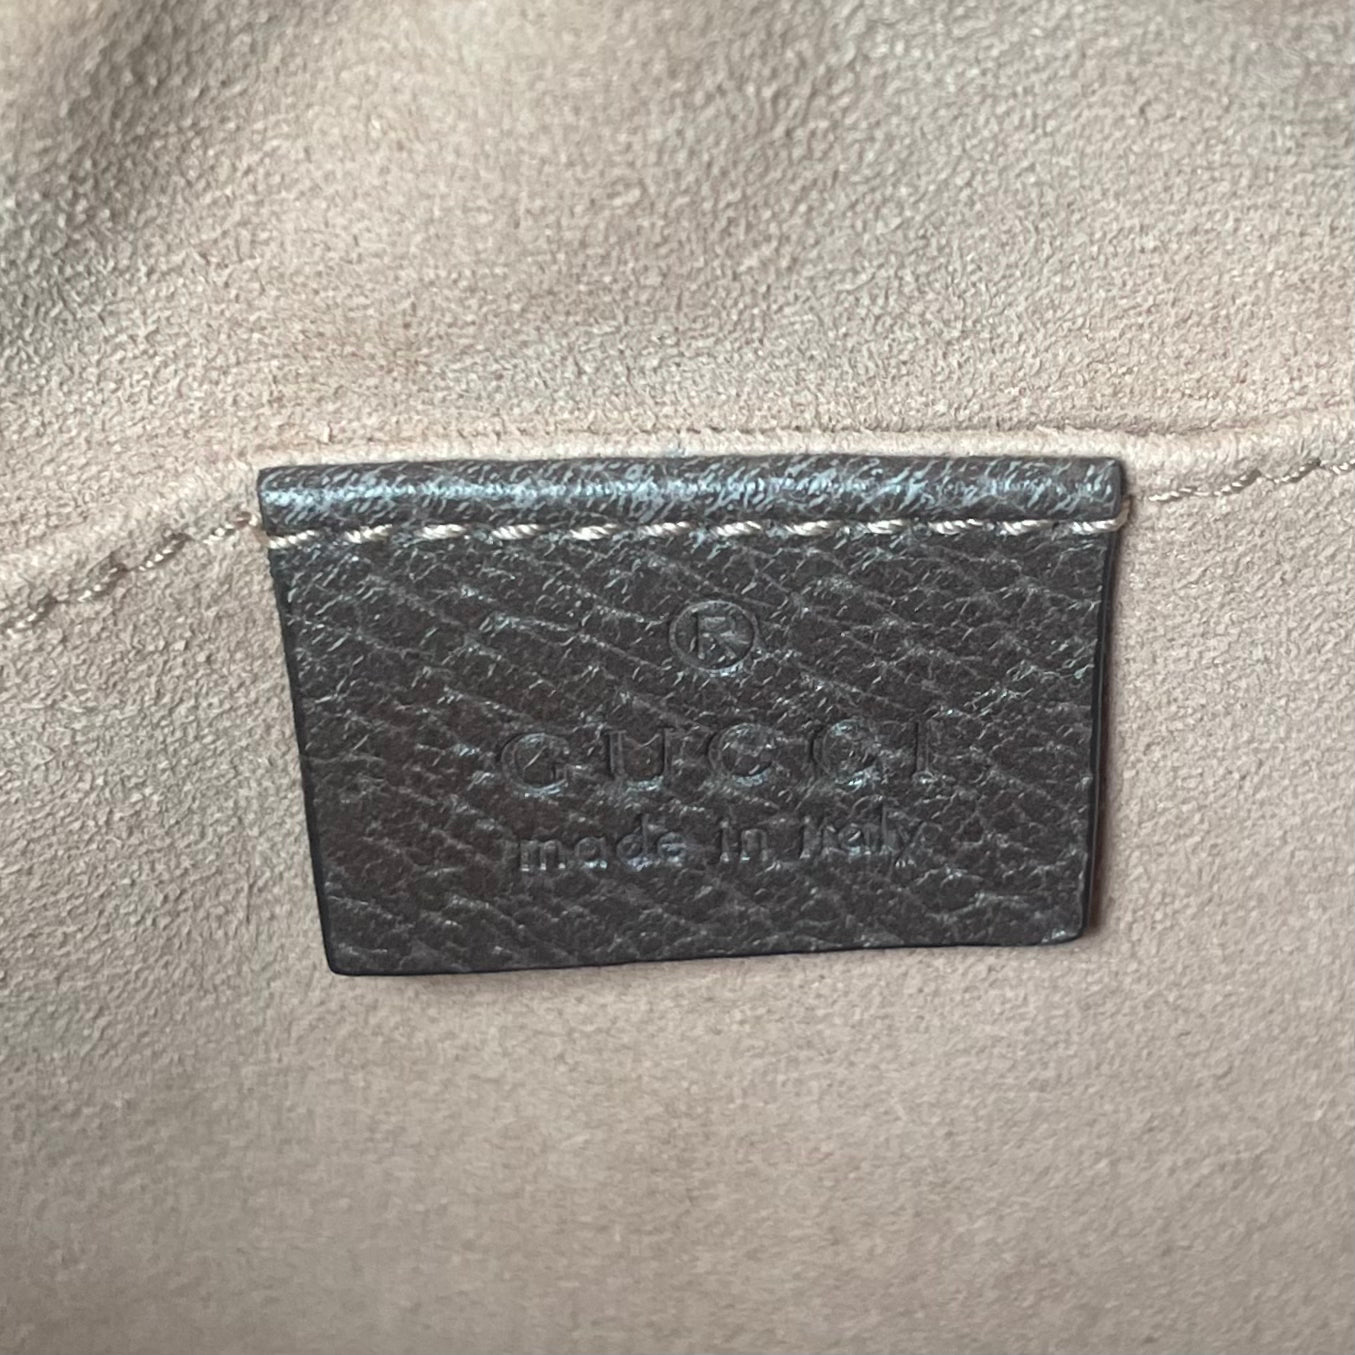 GUCCI Ophidia GG Small Belt Bag